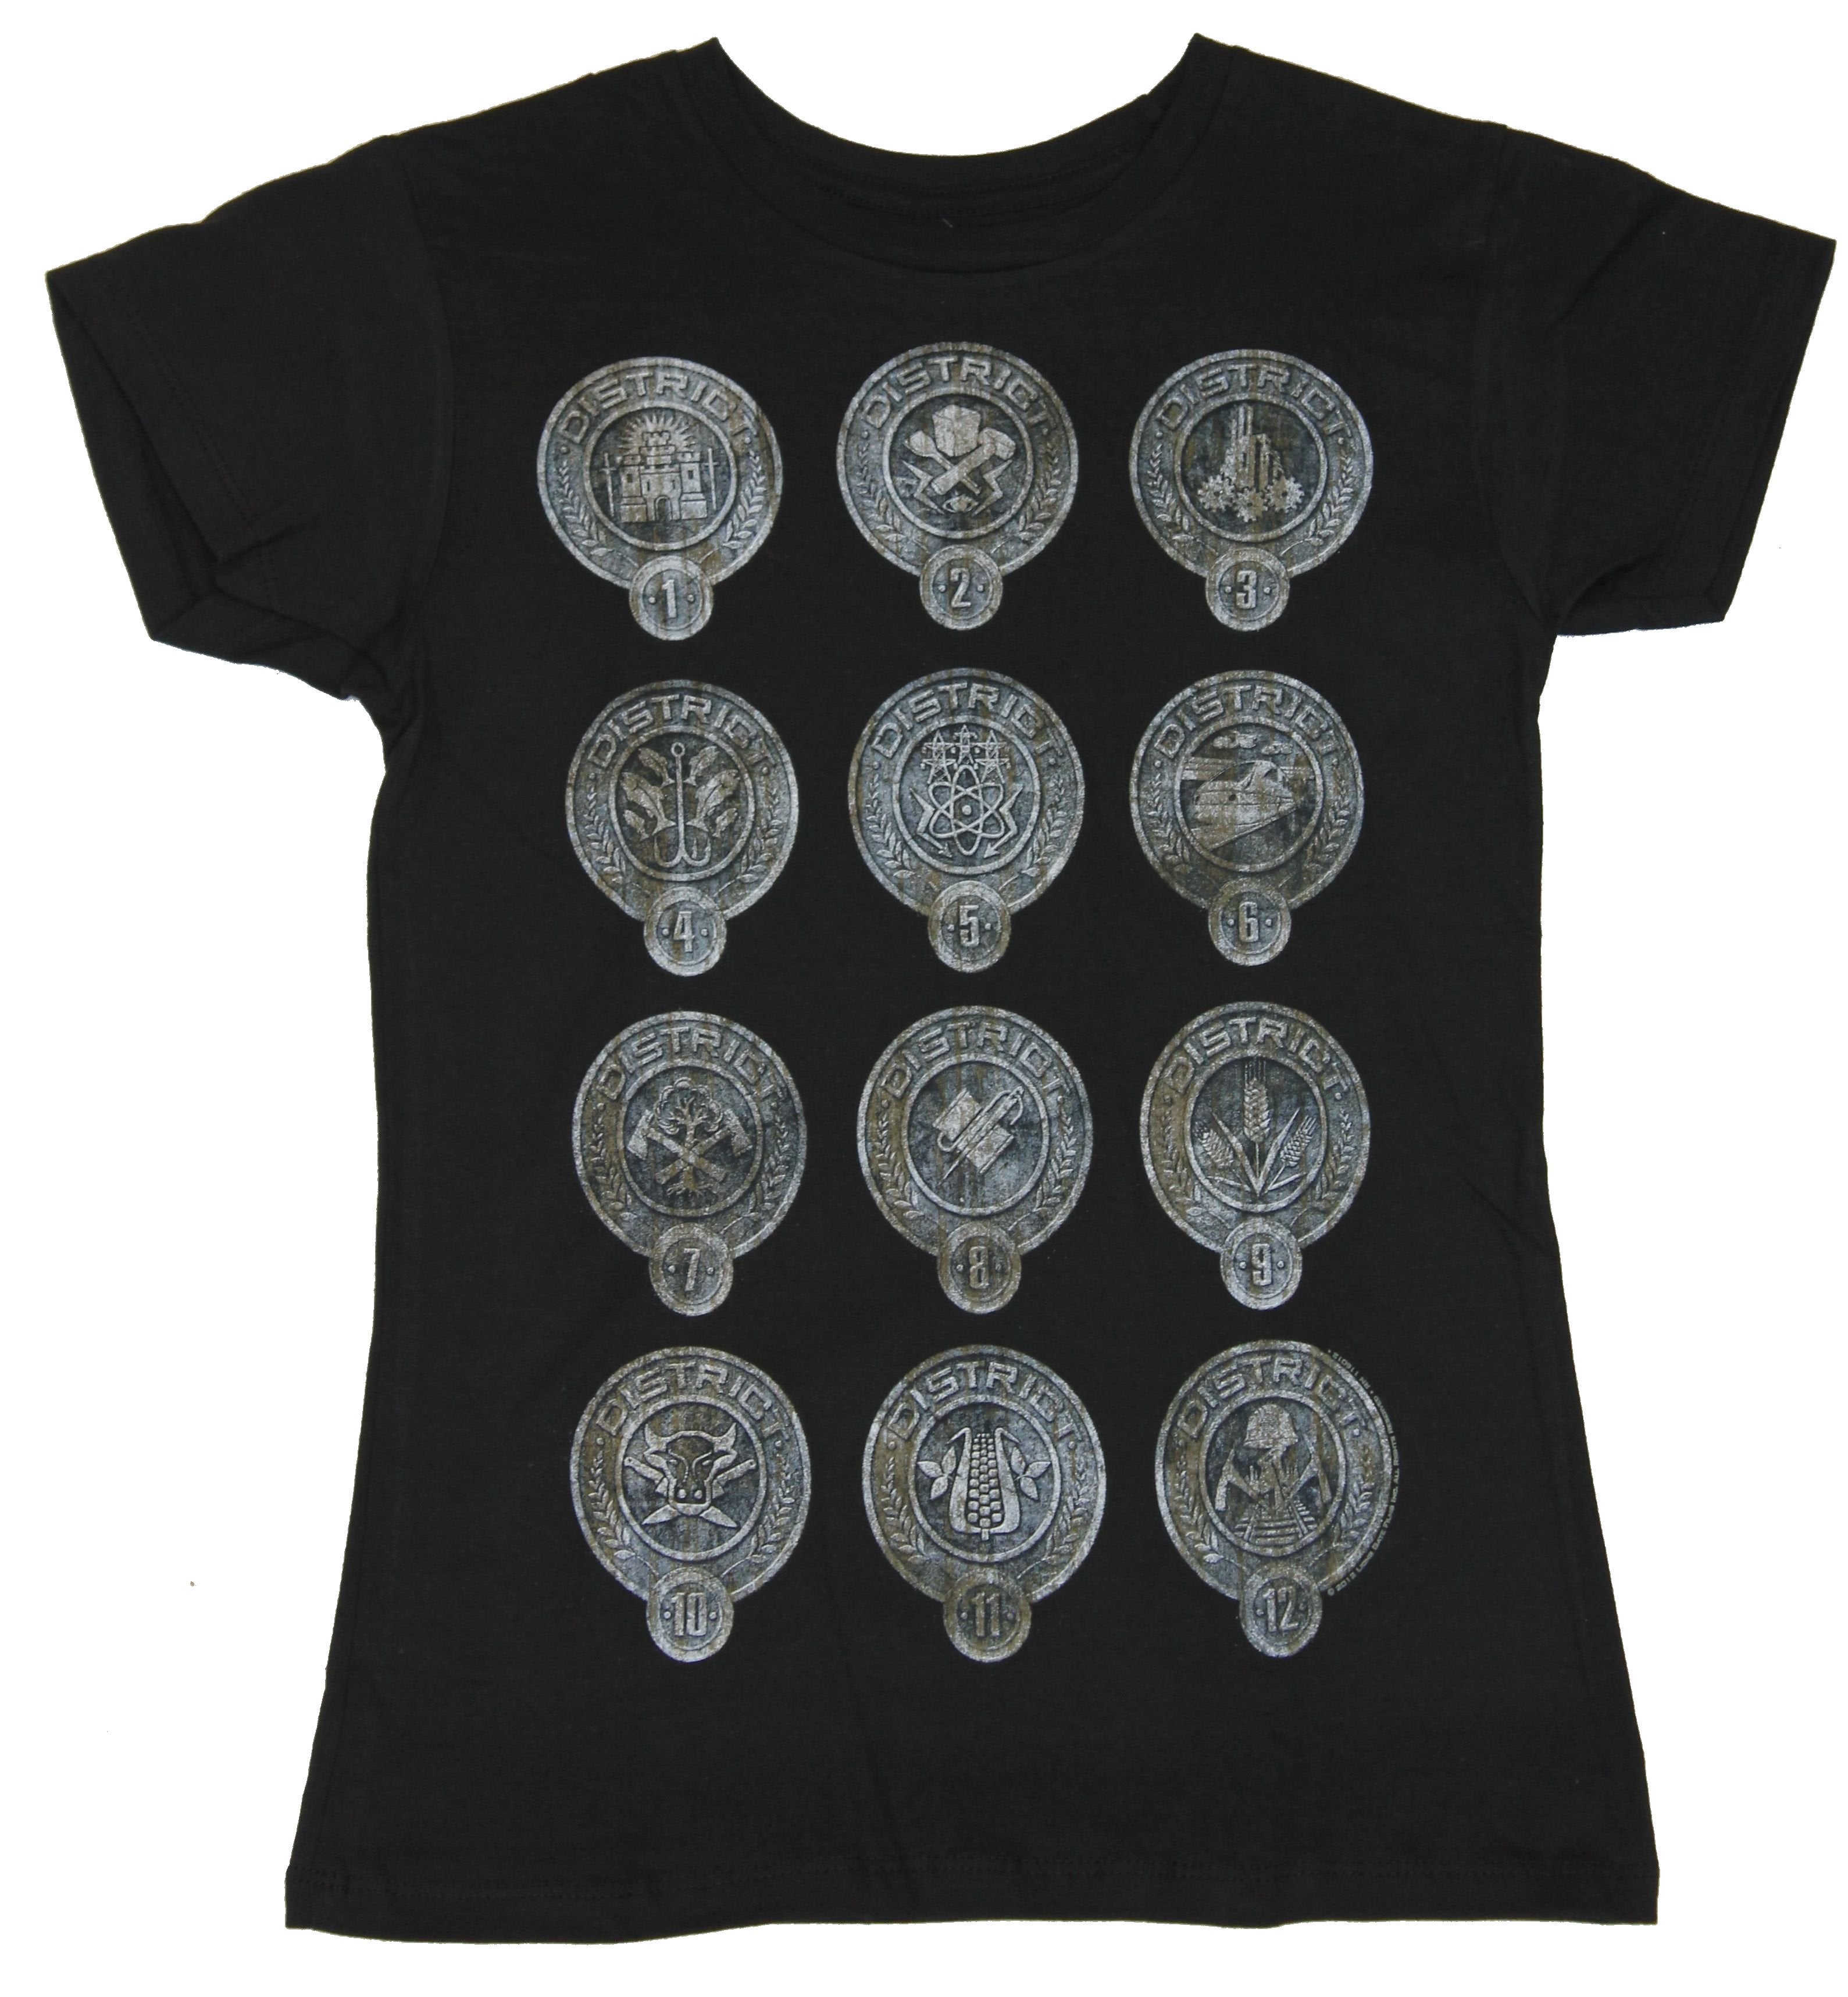 The Hunger Games Girls Juniors T-Shirt - Stone Circles of all 12 Districts Image